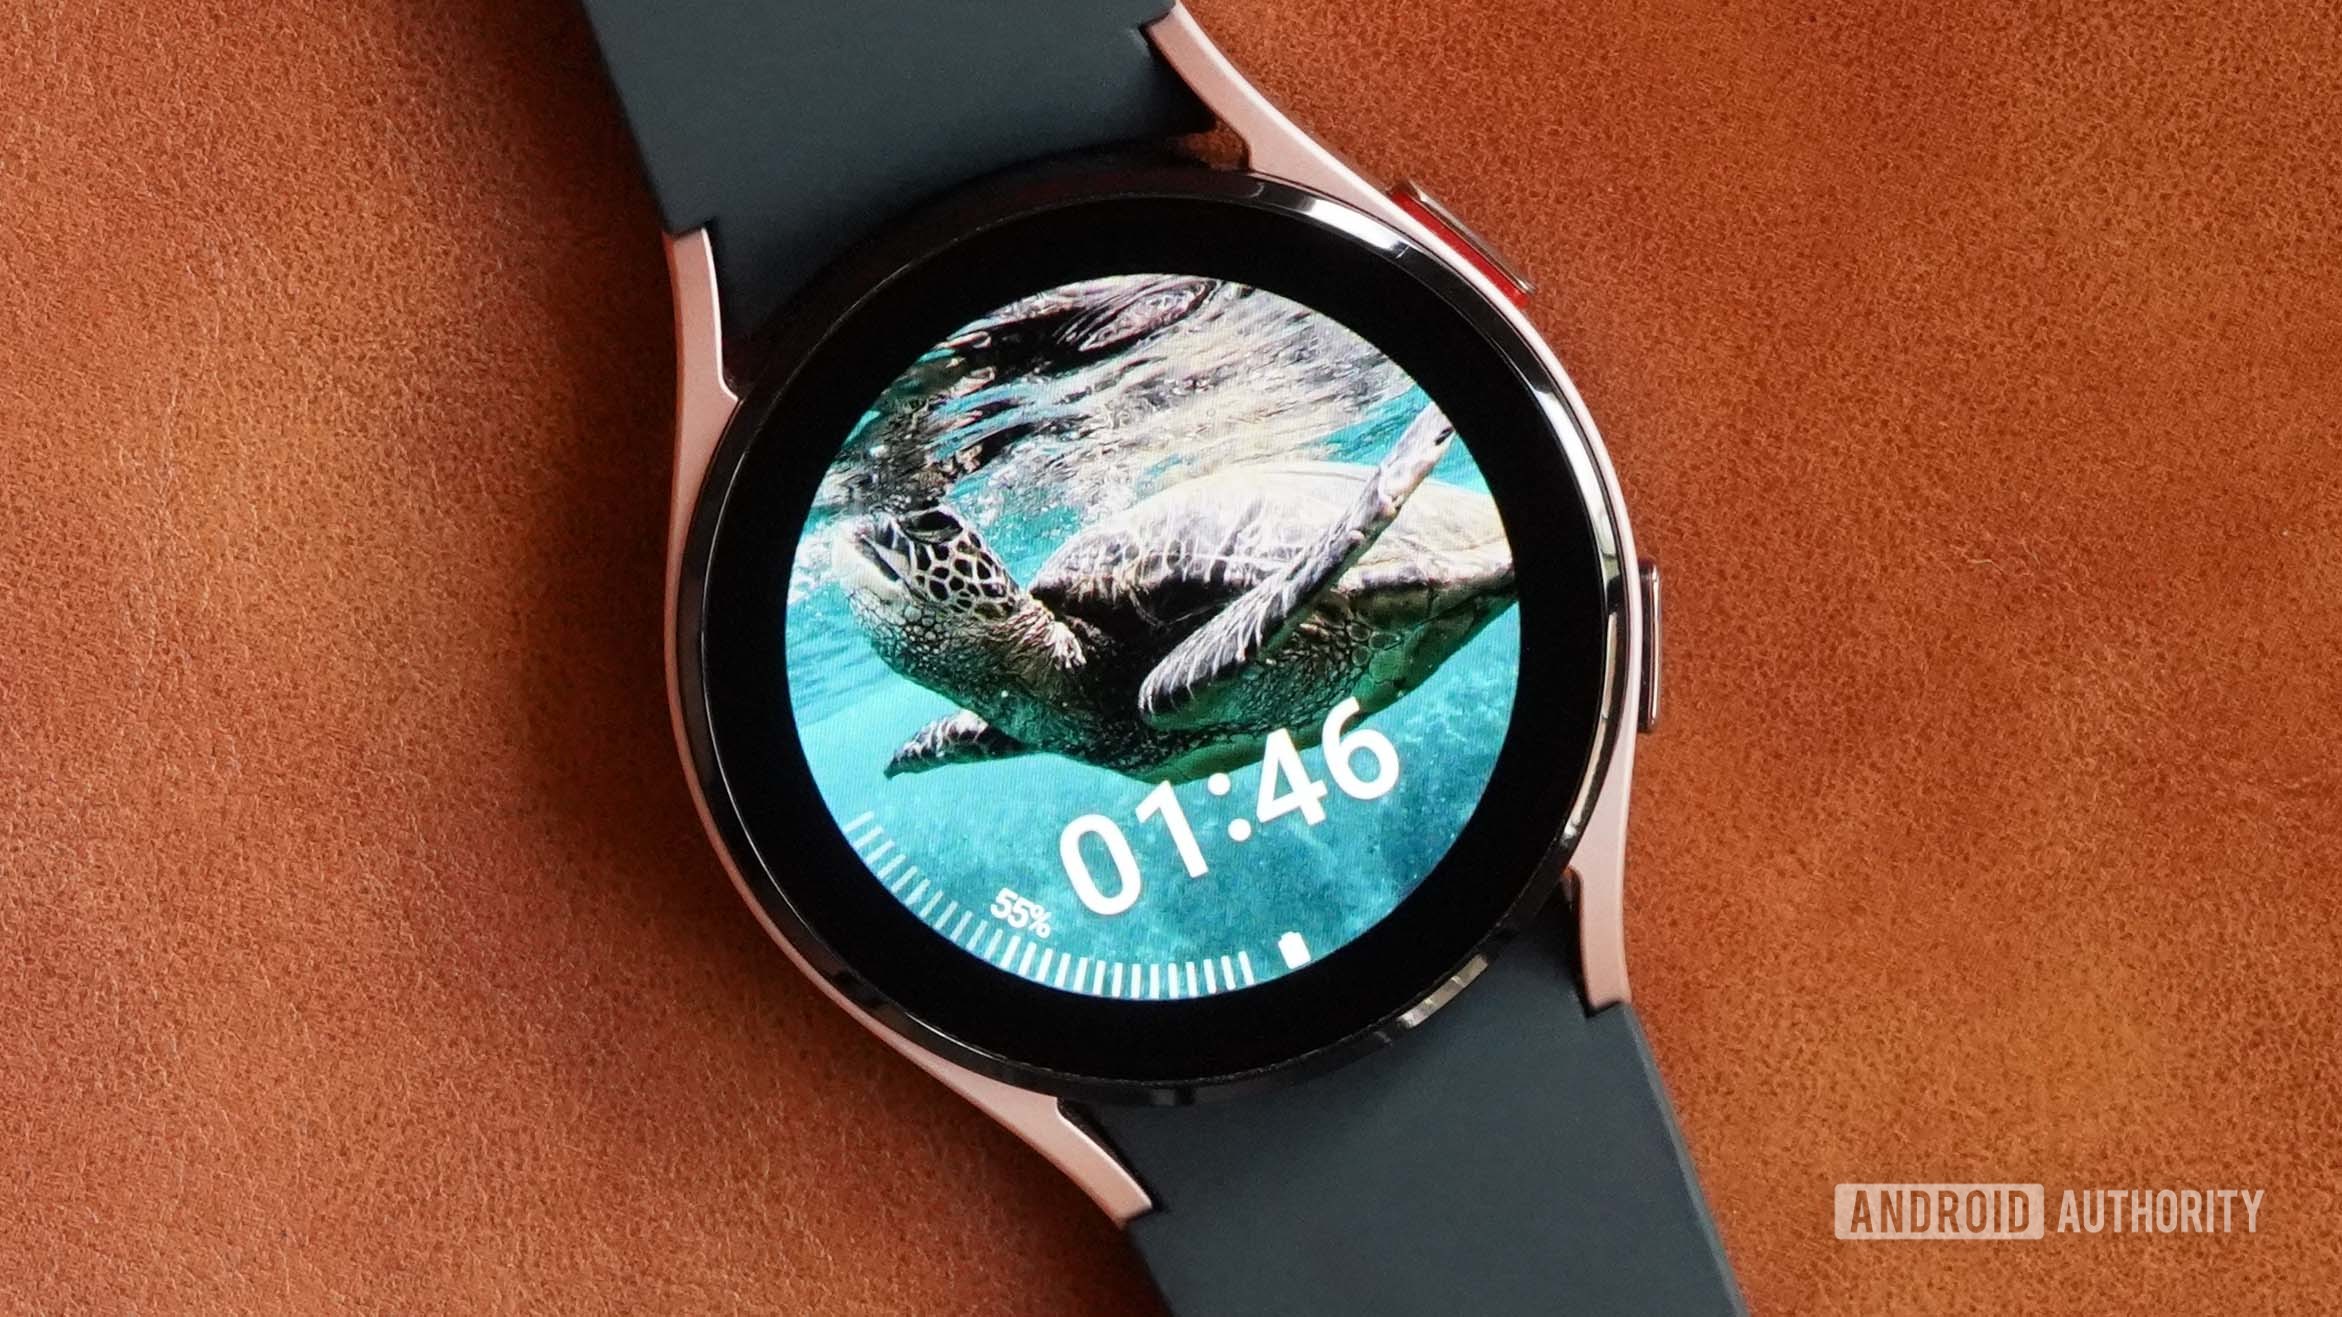 A samsung galaxy watch 4 on a leather surface displays the watch face my photo+.